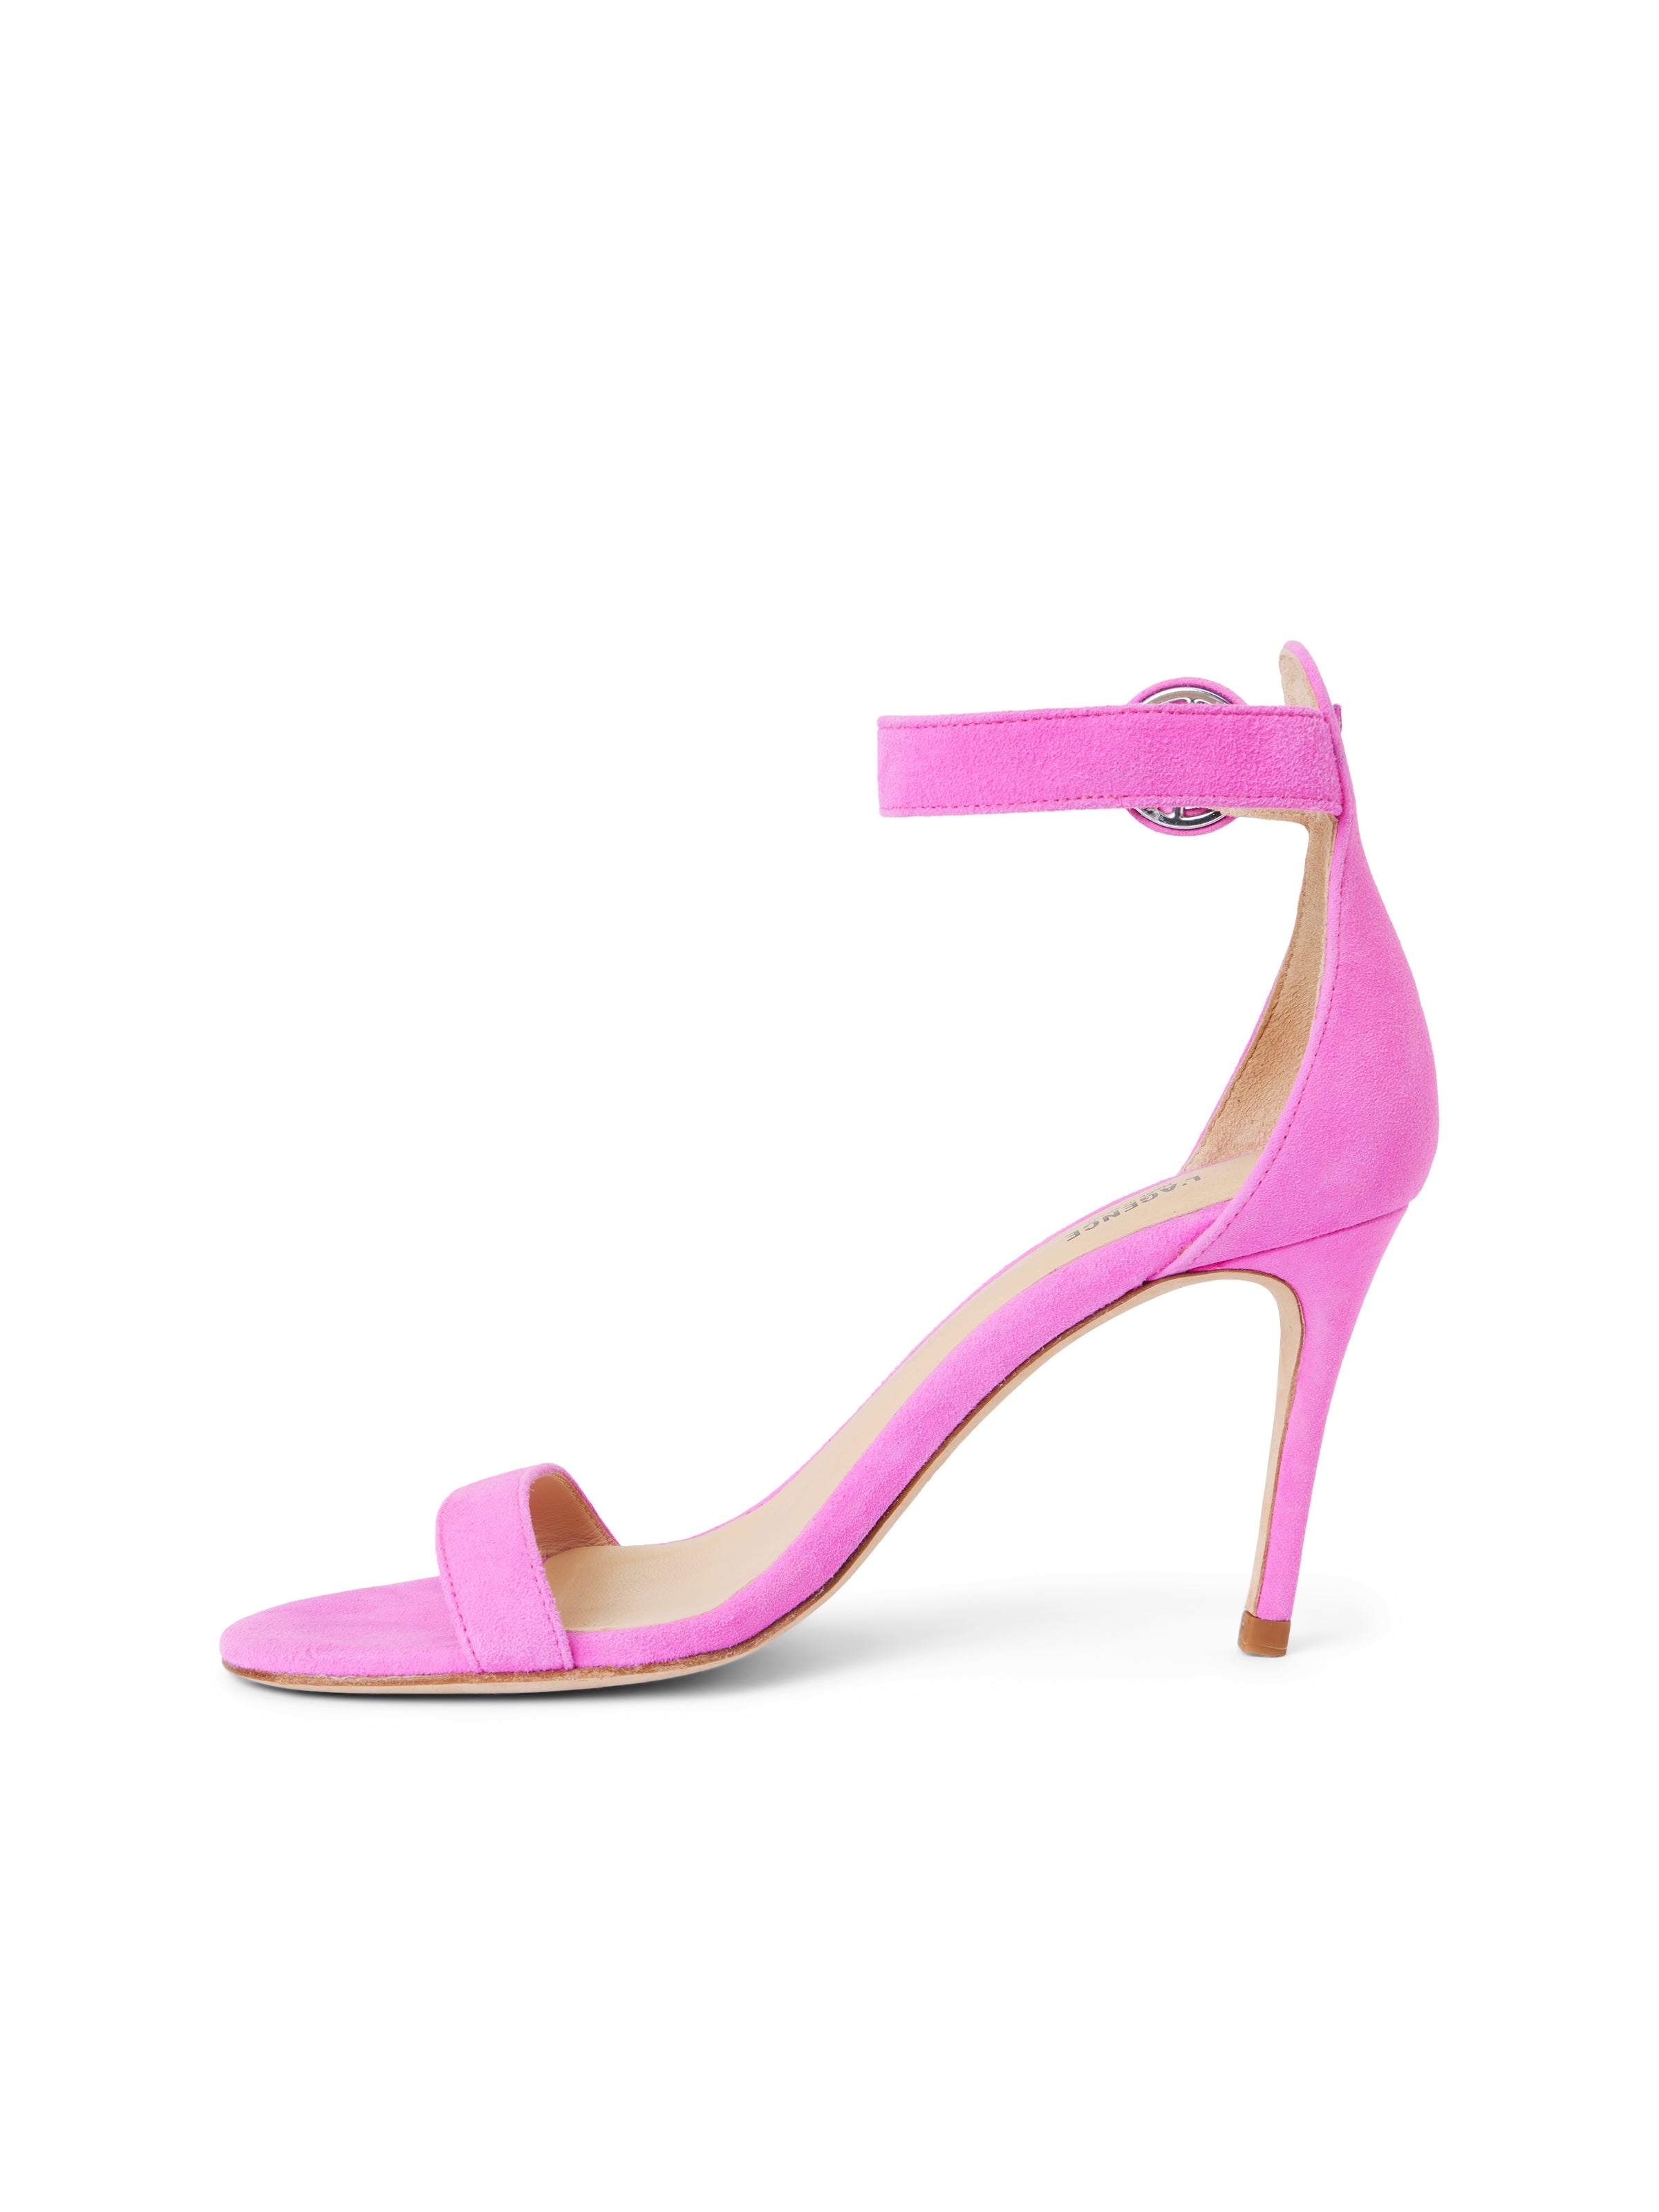 L Agence Gisele Sandal In Neon Pink Suede | ModeSens